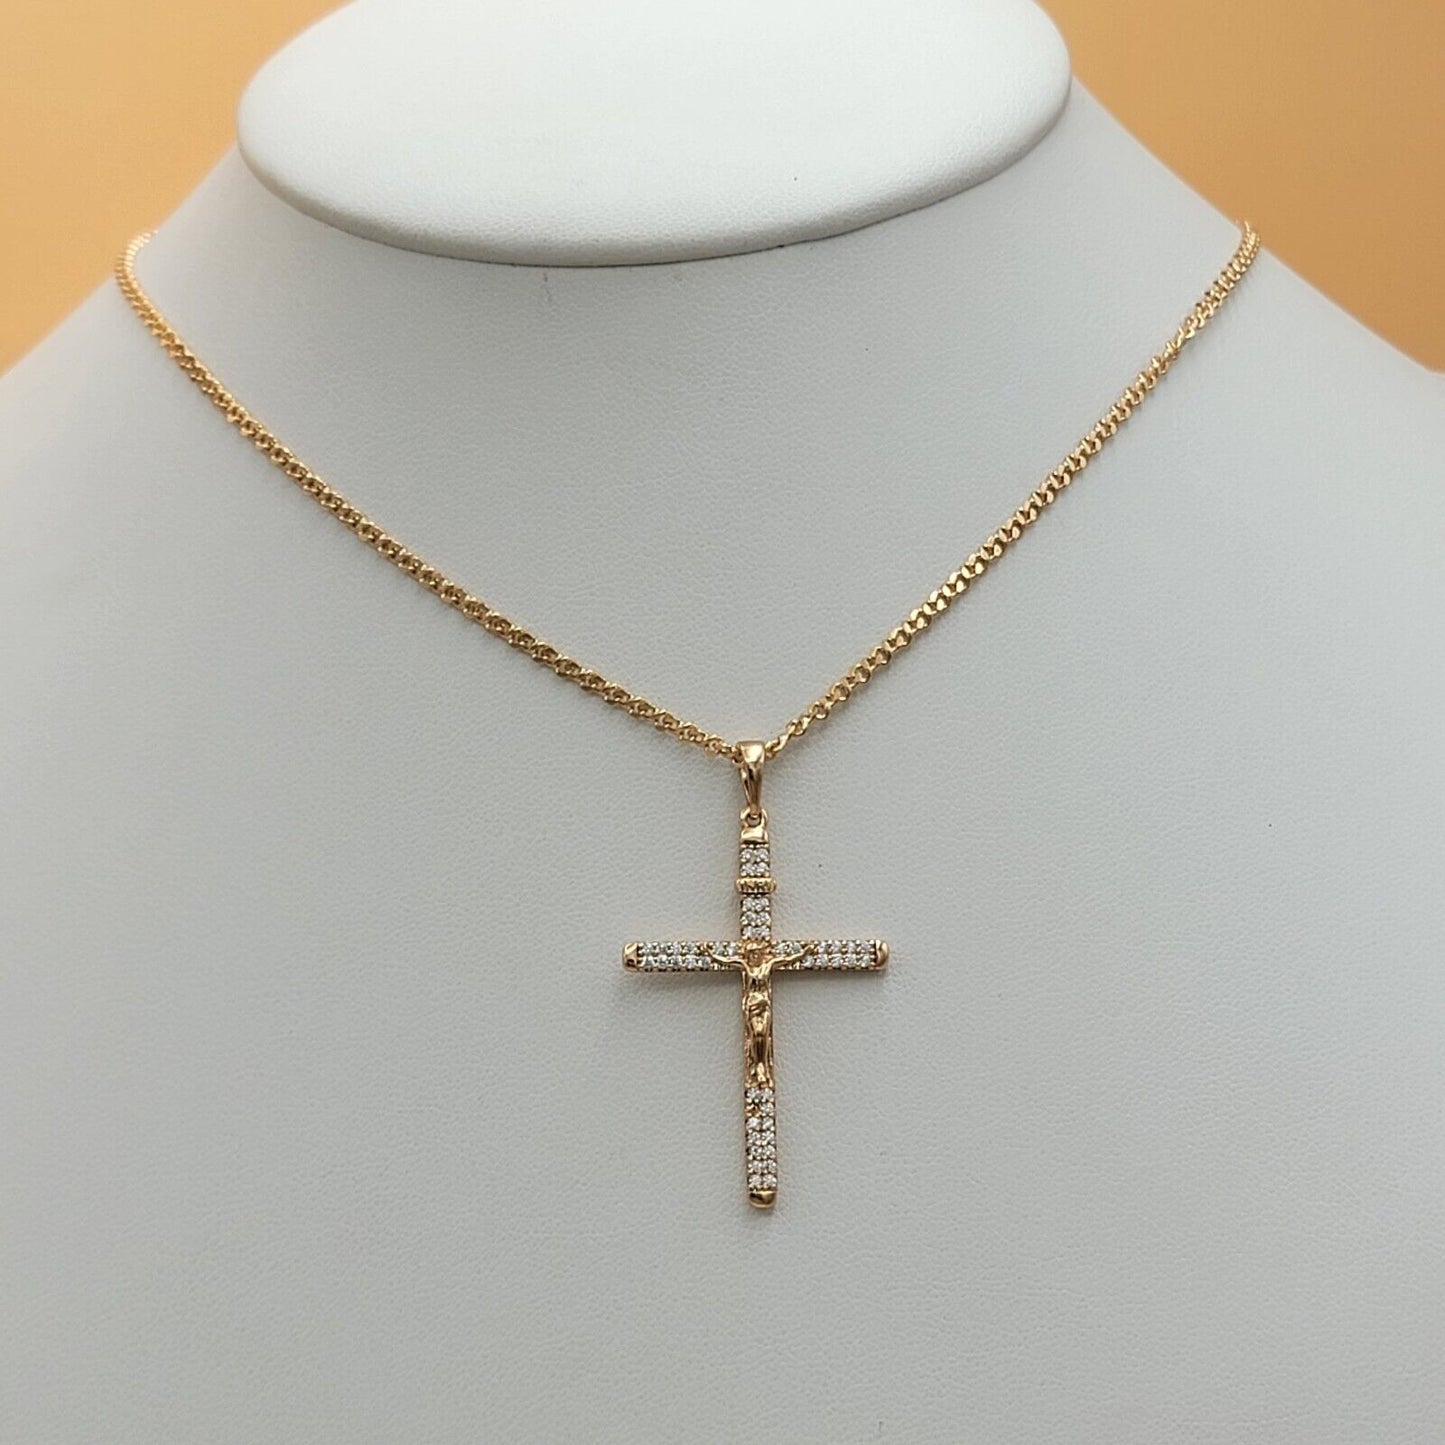 Necklaces - 18K Gold Plated. Crucifix Jesus Cross crystals Pendant & Chain. Necklace.